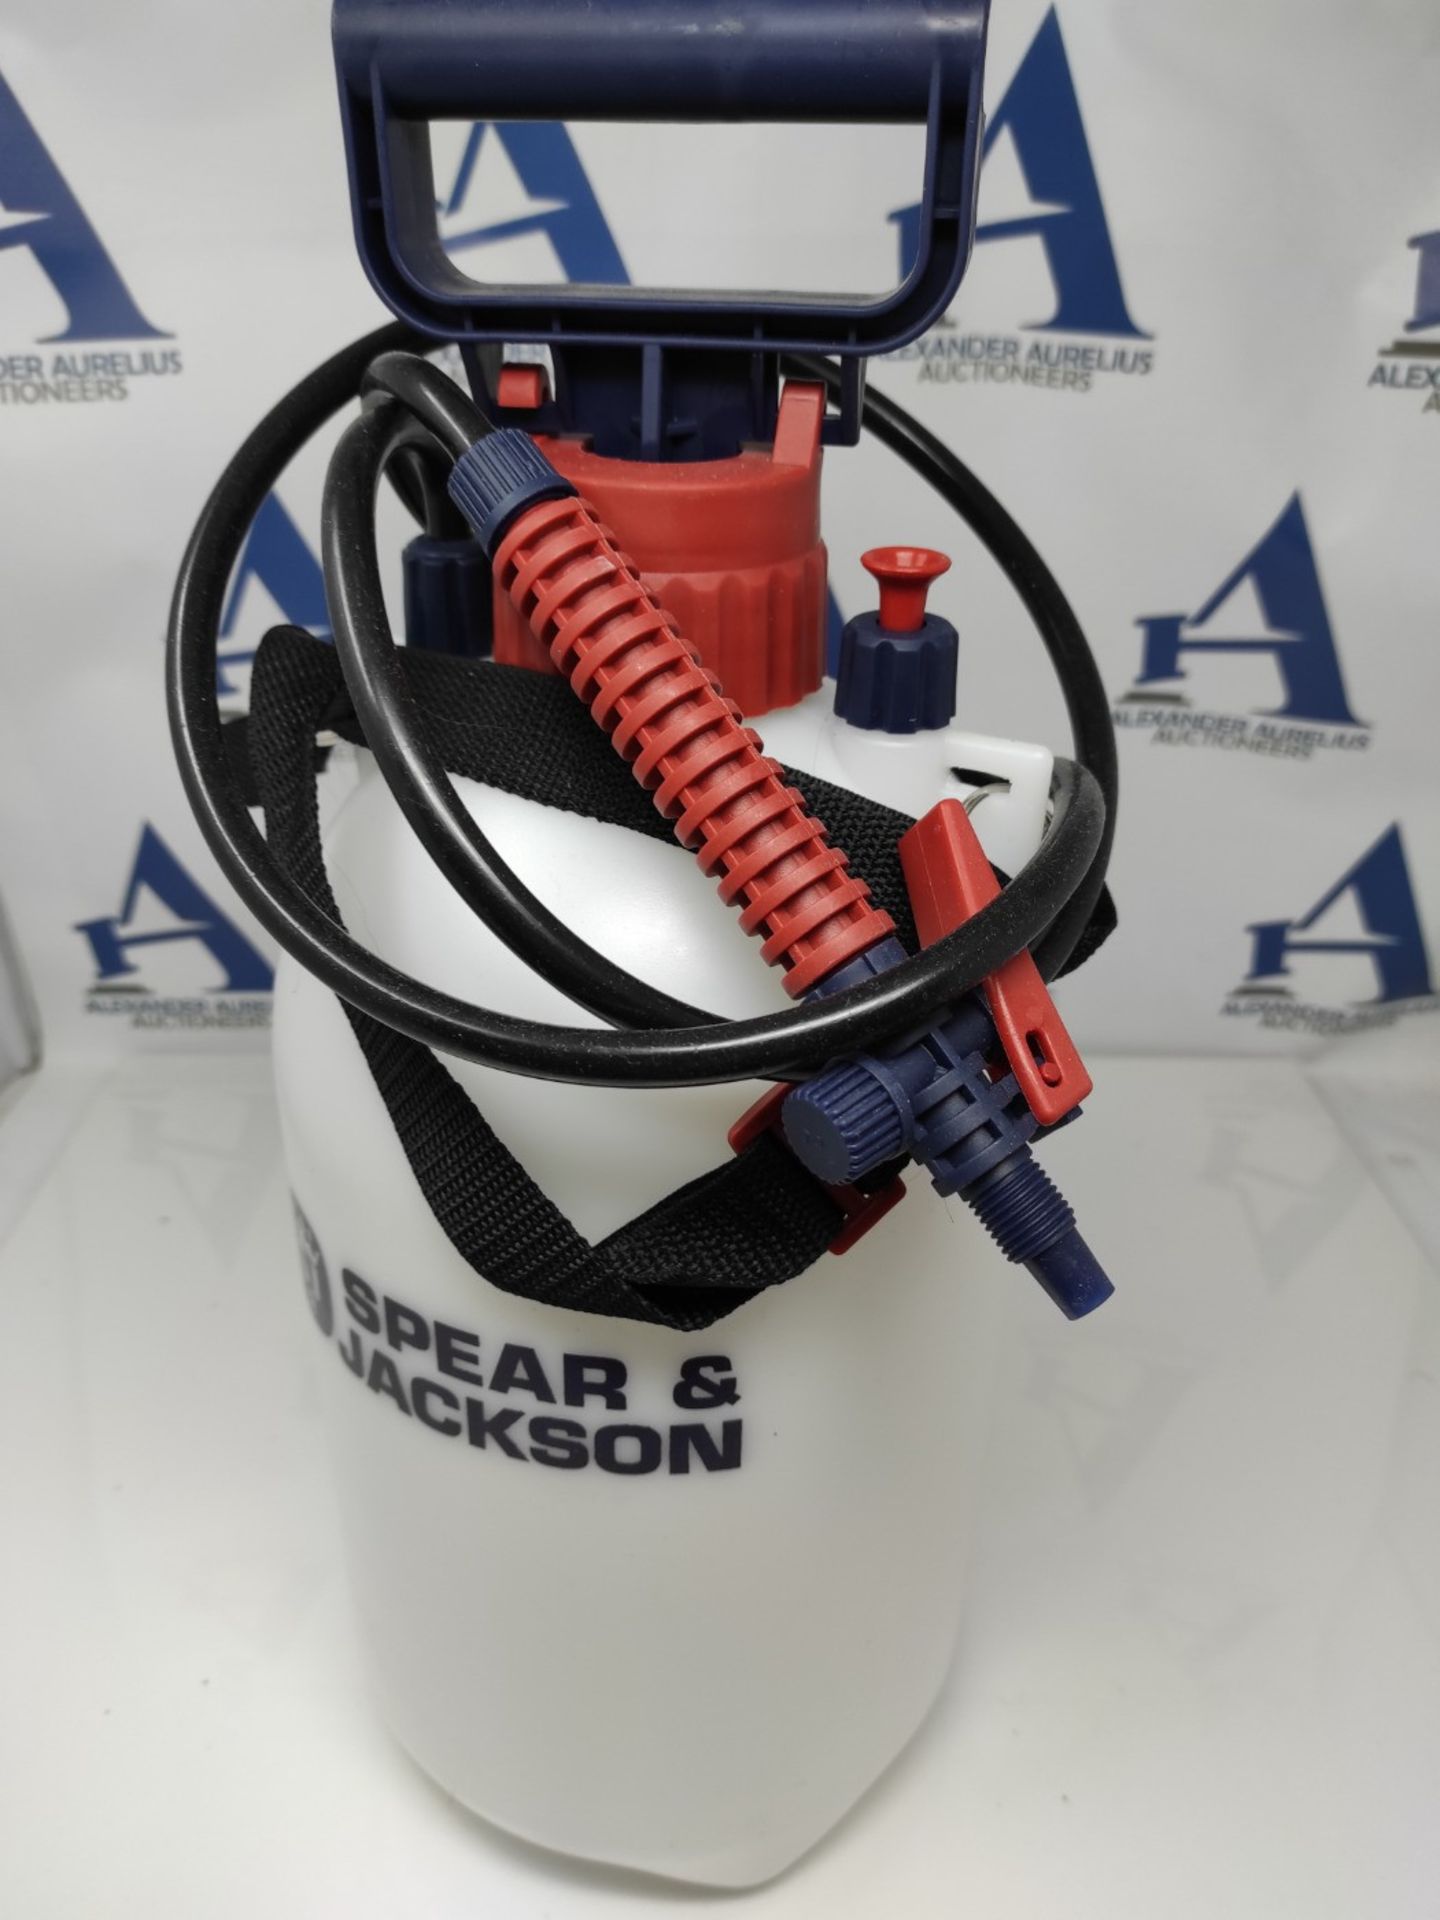 Spear & Jackson 5LPAPS Pressure Sprayer, with pump action, 5 liters - Image 3 of 3